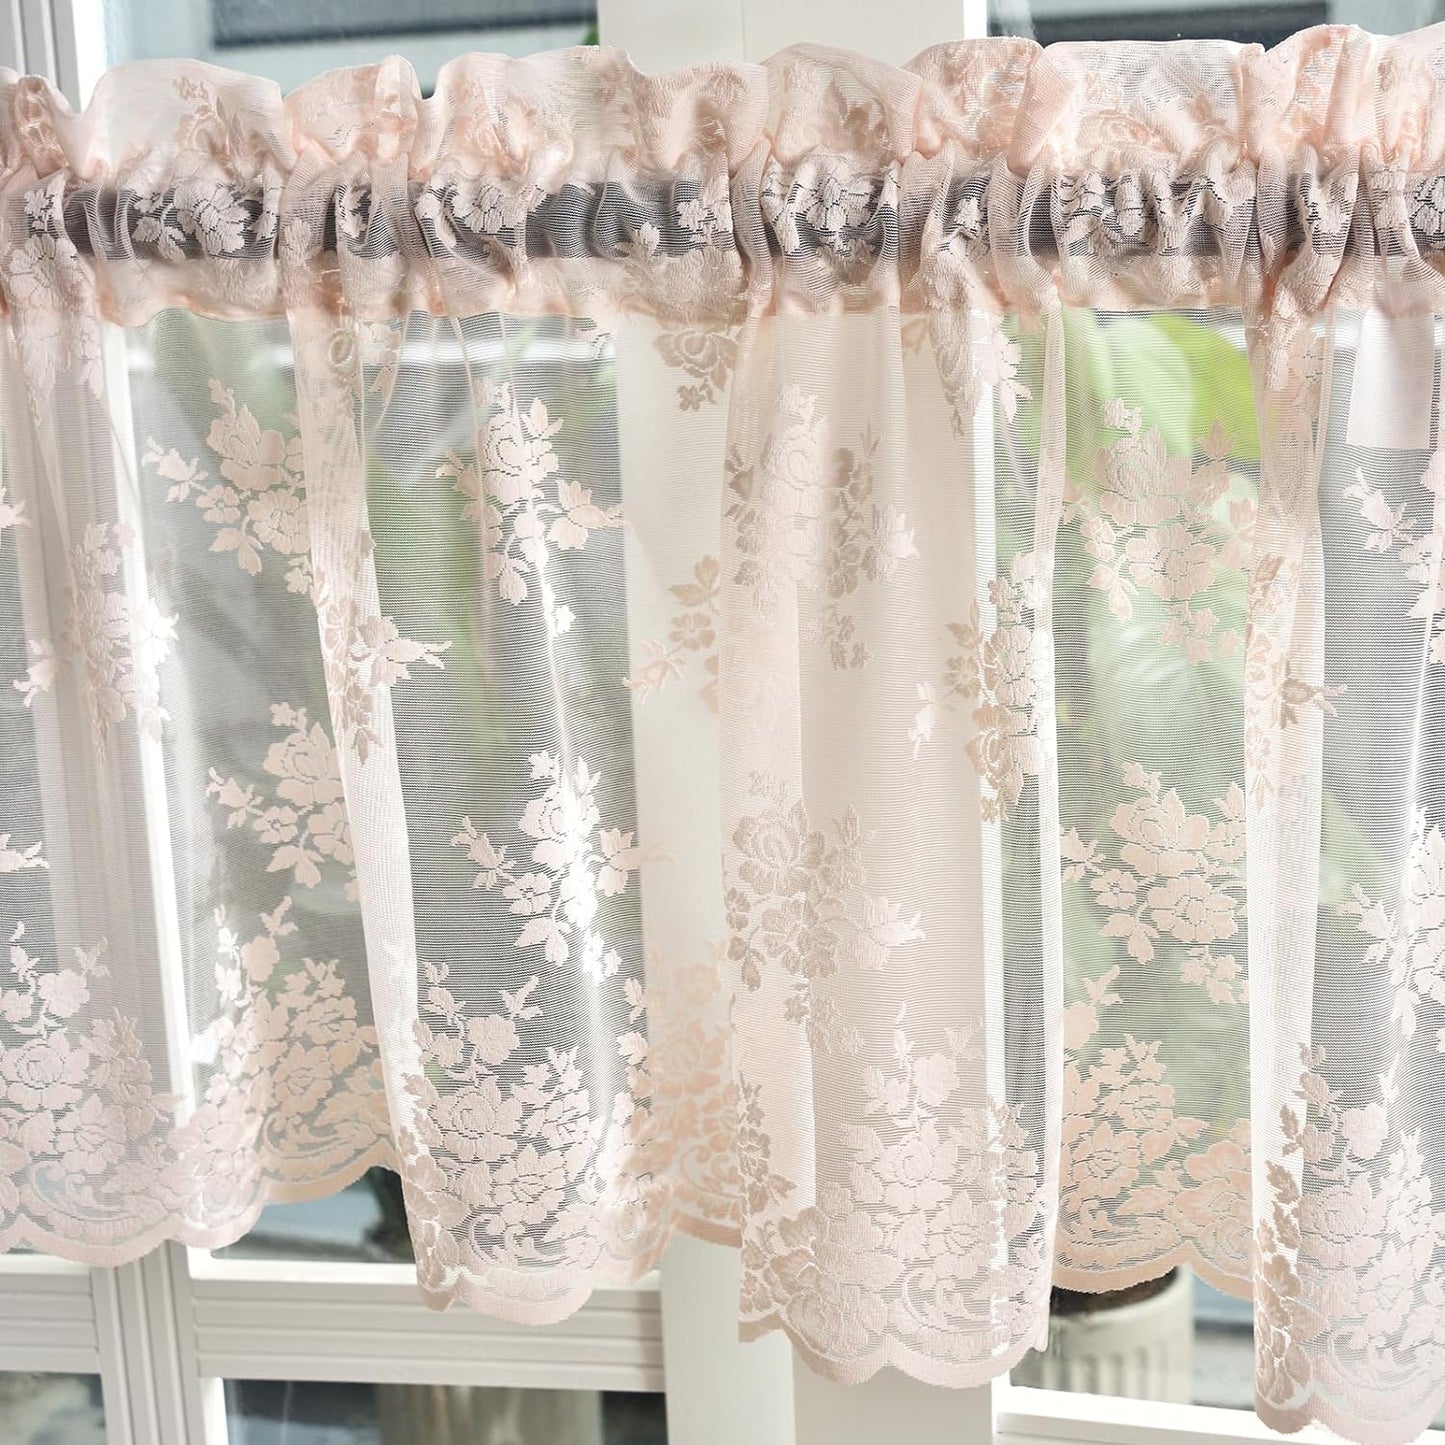 Kotile Sage Green Sheer Valance Curtain for Windows, Rustic Floral Spring Sheer Window Valance Curtain 18 Inch Length, Light Filtering Rod Pocket Lace Valance, 52 X 18 Inch, 1 Panel, Sage Green  Kotile Textile Blush 52 In X 18 In (W X L) 